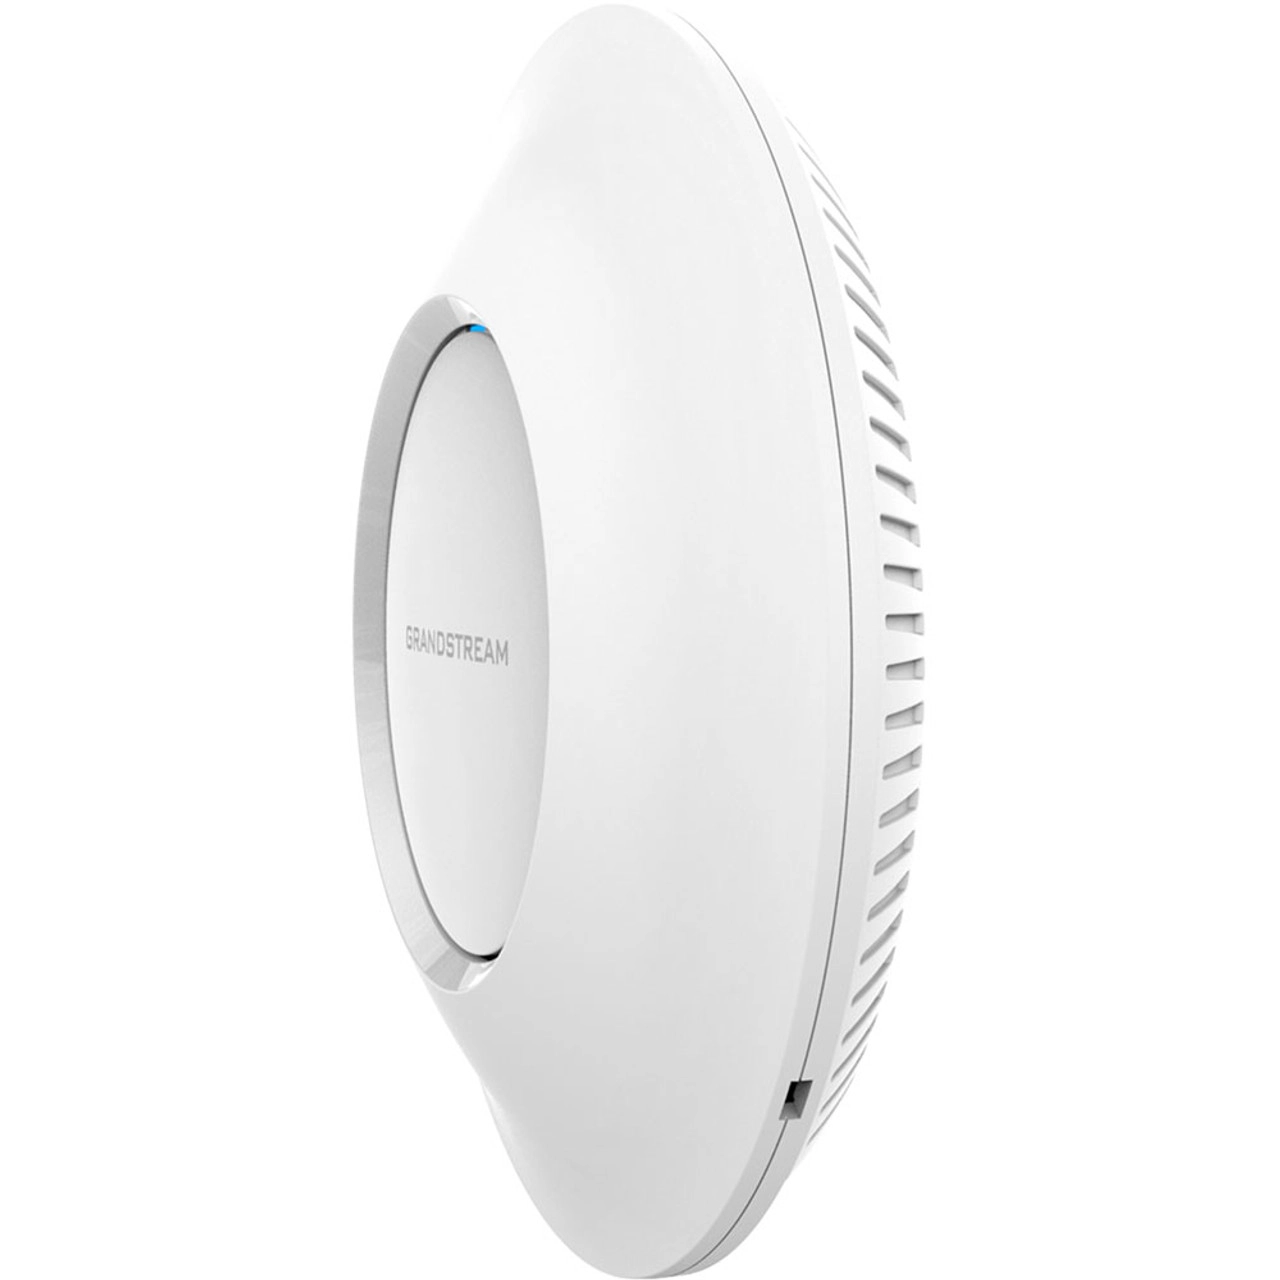 Grandstream GWN7605 Dual Band WiFi Access Point side